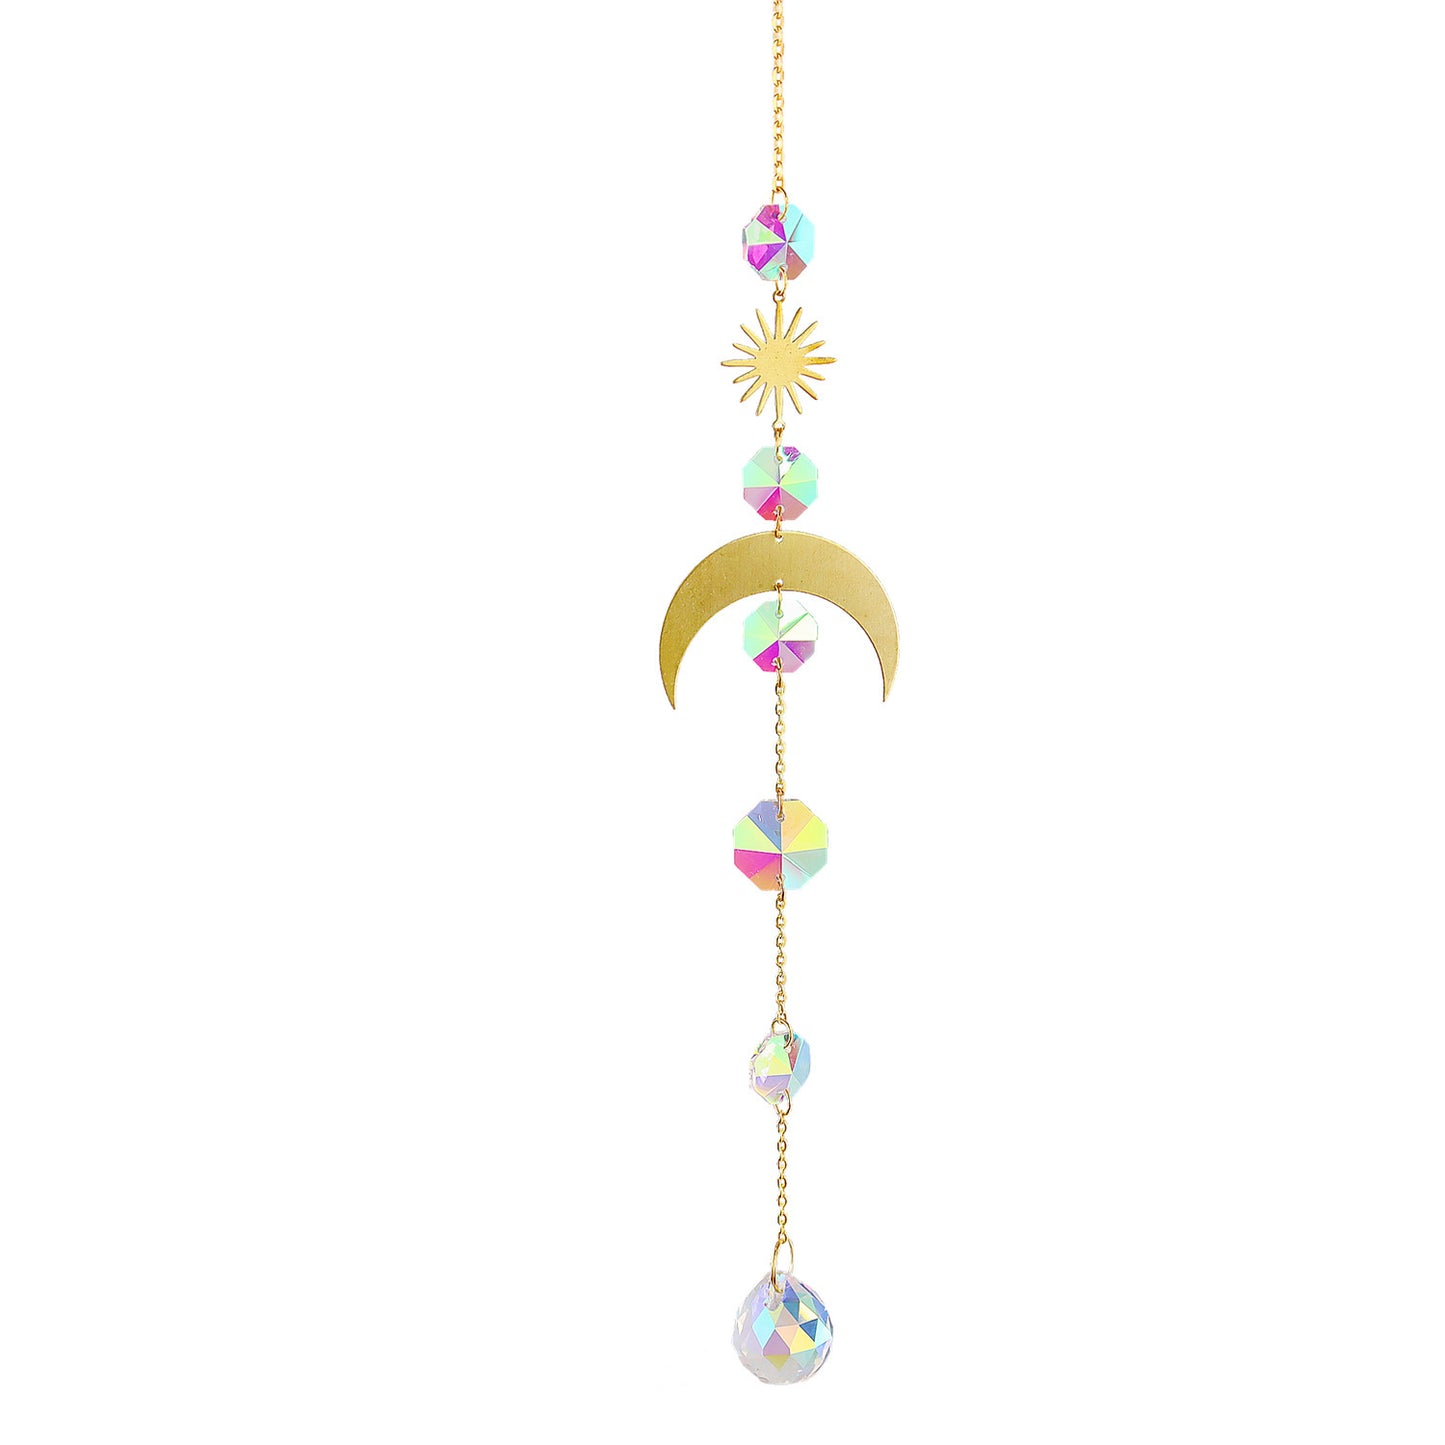 K9 Aura Crystal Hanger  Crescent  Moon with 5 Stars & Sun Brass Color  - Long inch - China - NEW911